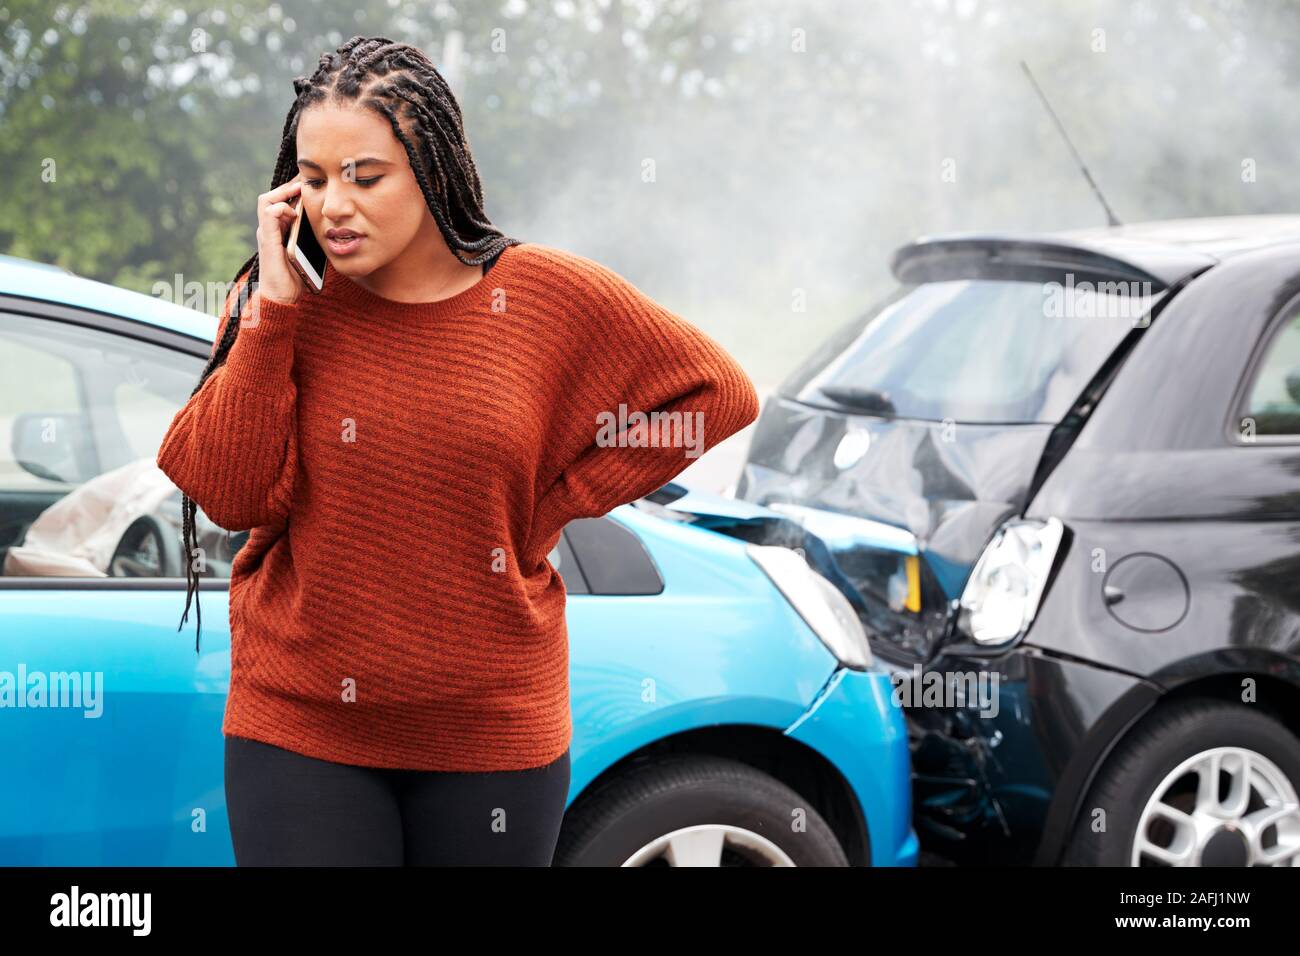 Female Motorist Involved In Car Accident Calling Insurance Company Or Recovery Service Stock Photo